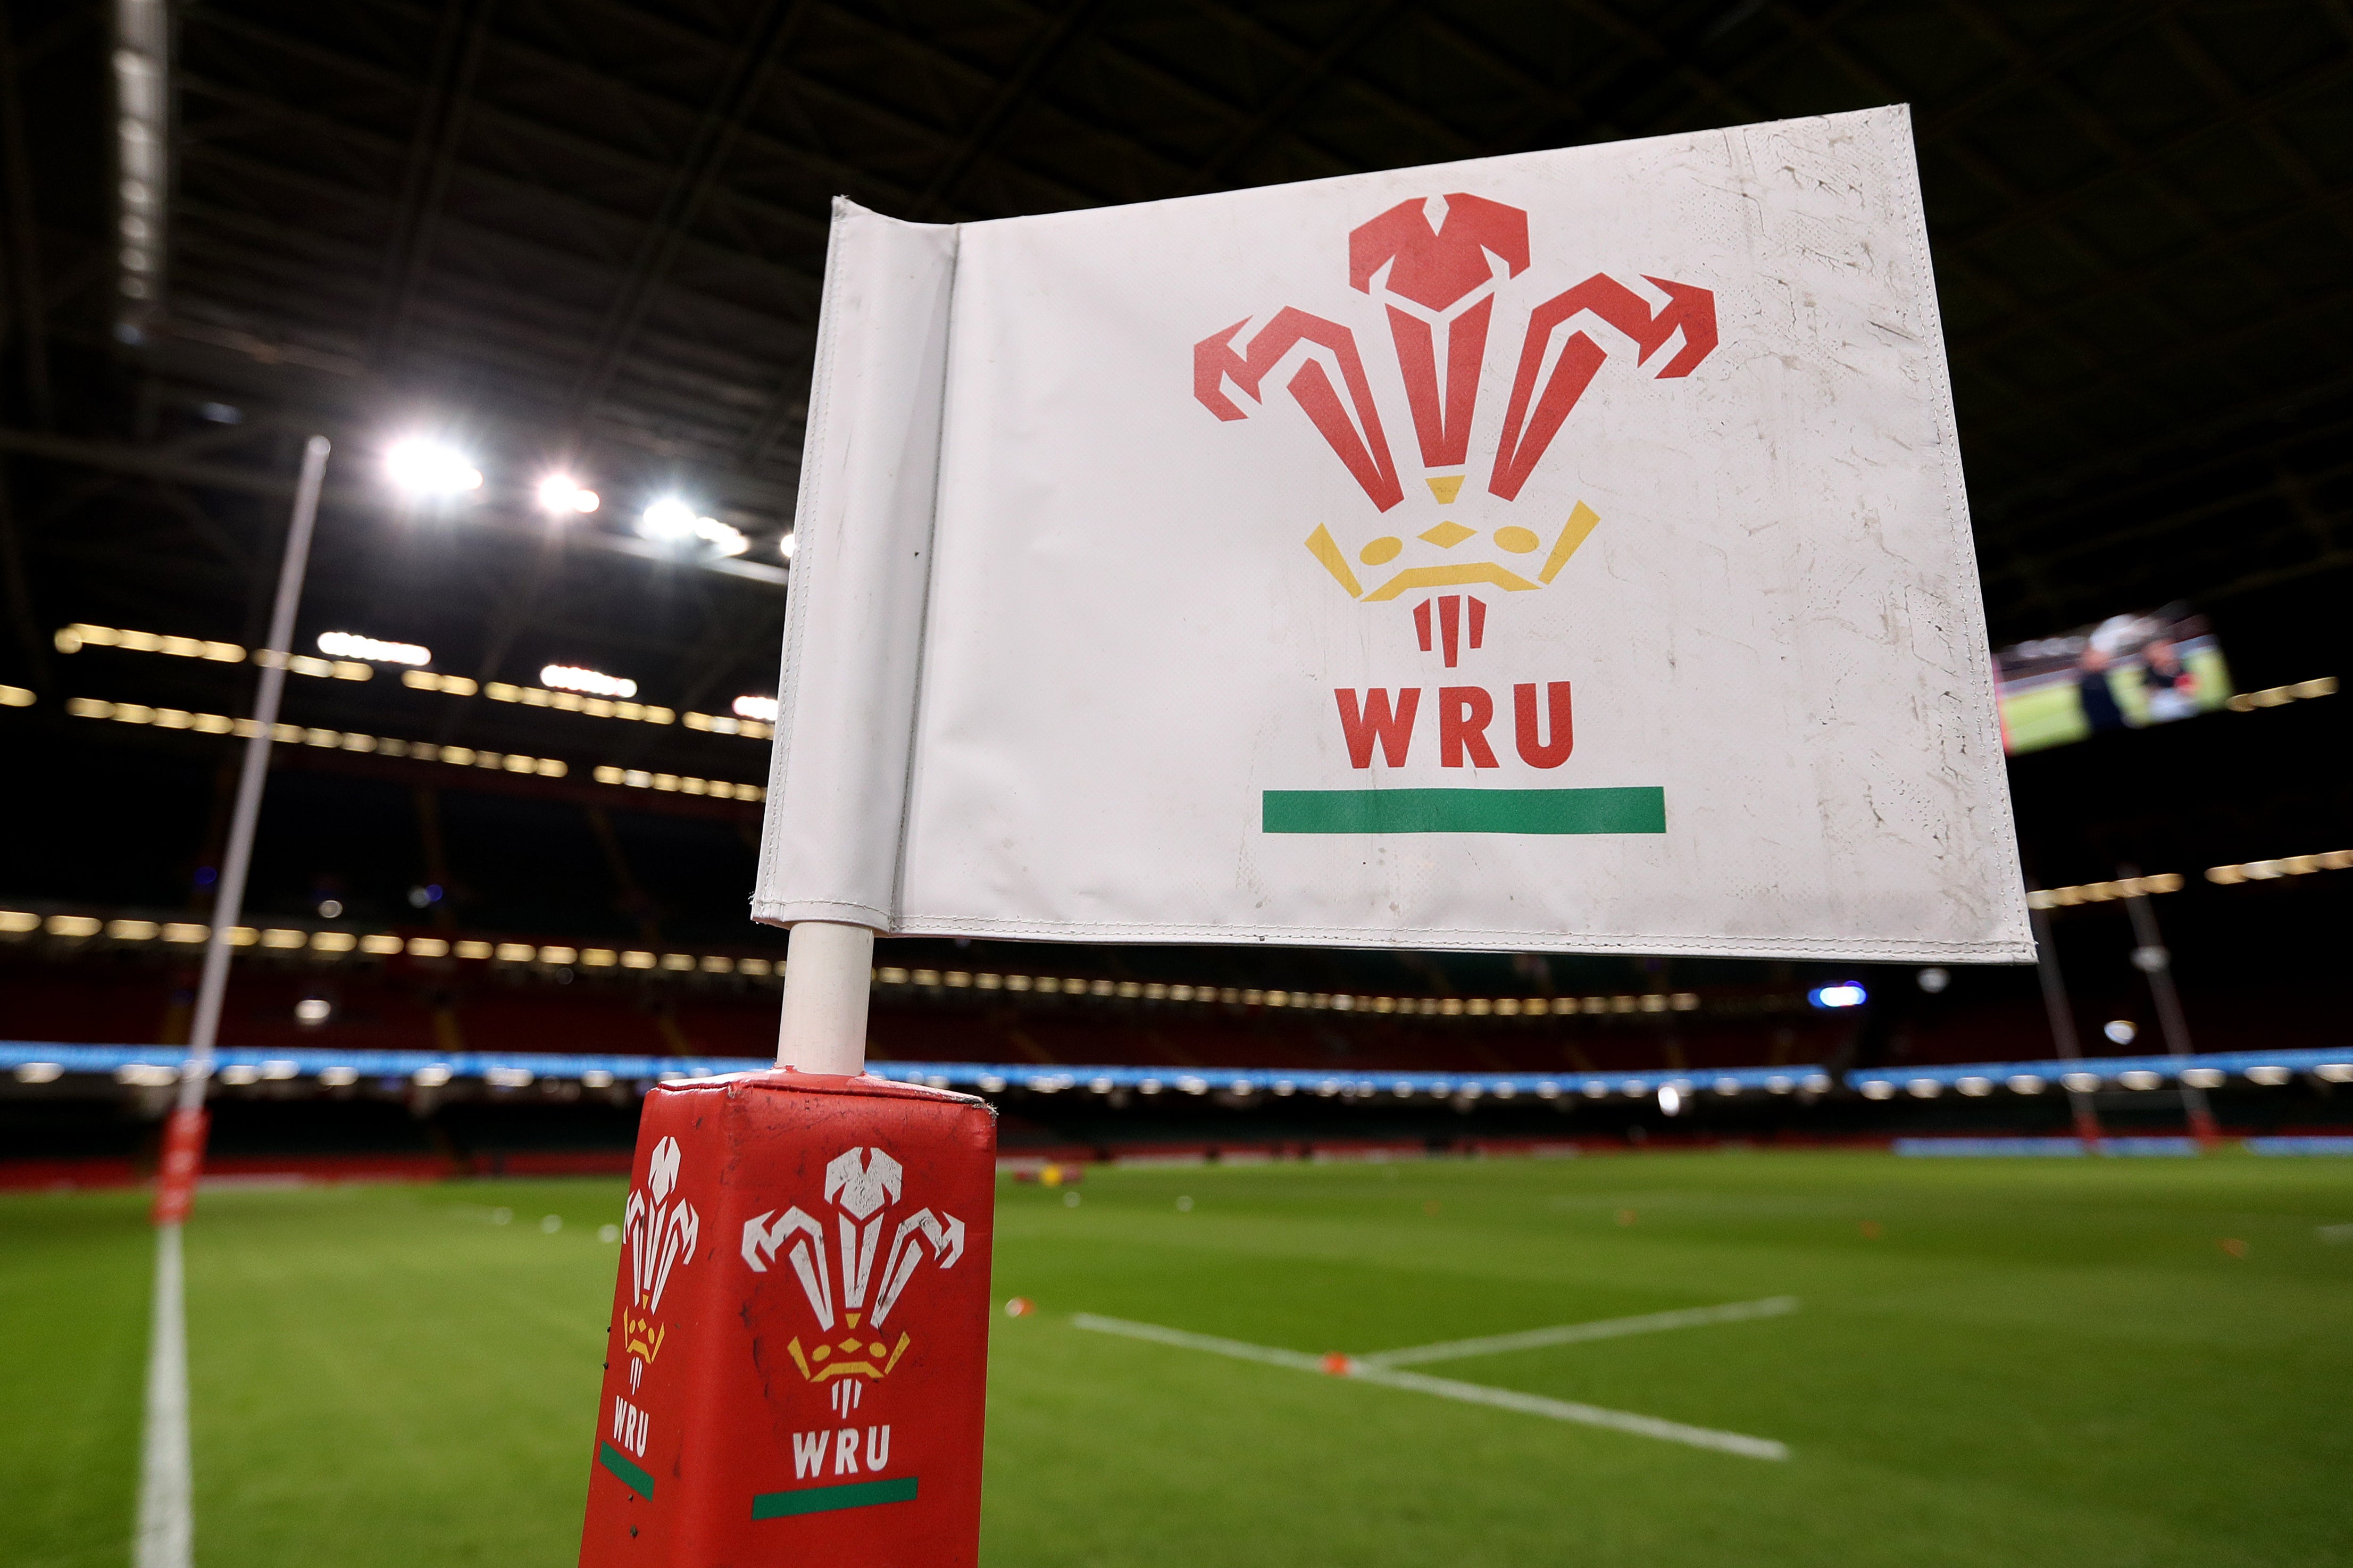 The Welsh Rugby Union has apologised and accepted all 36 recommendations made in the report